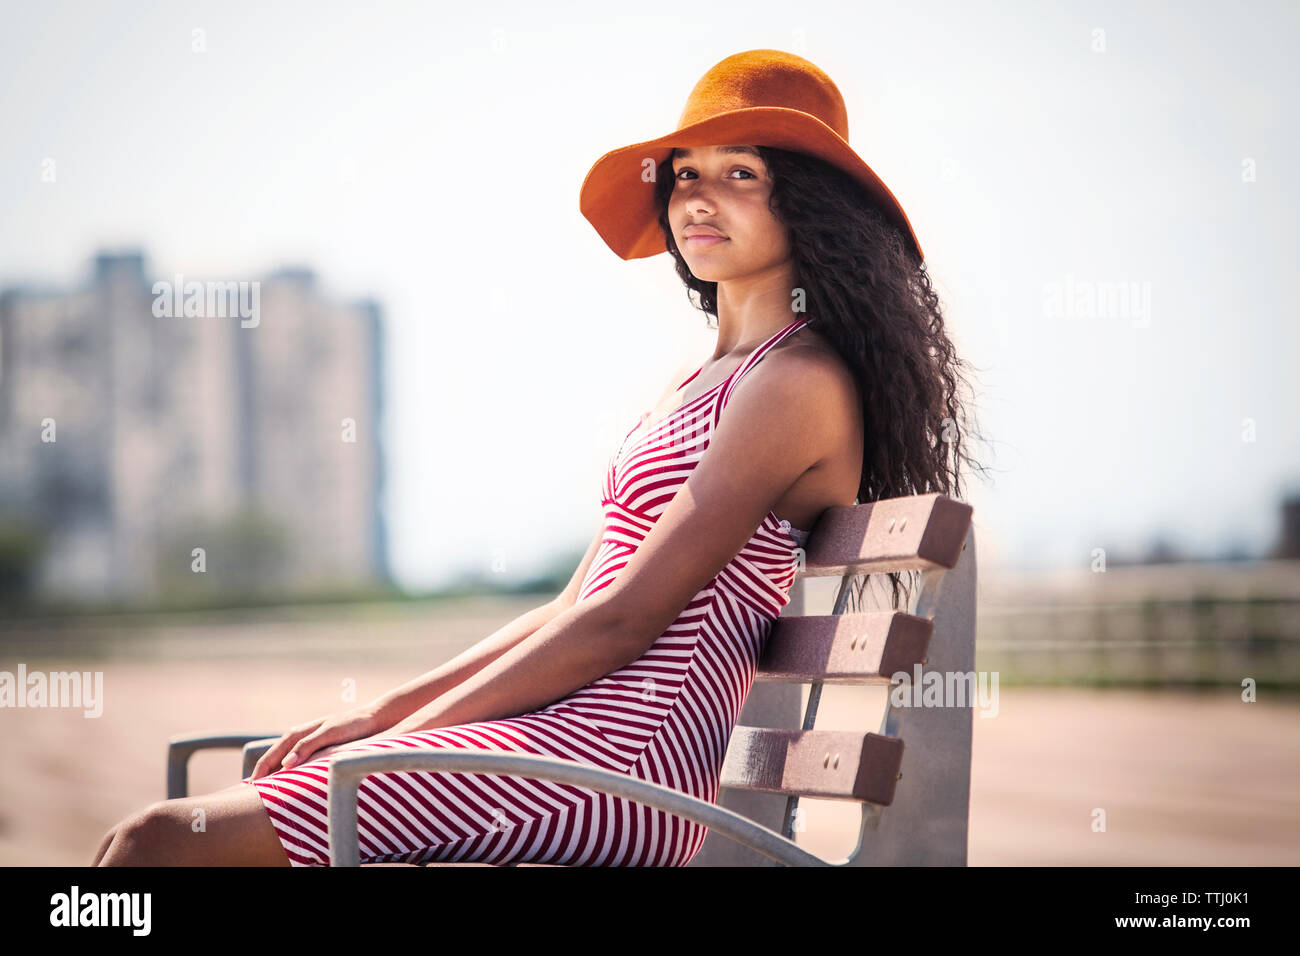 Portrait of girl sitting on bench at pier Stock Photo